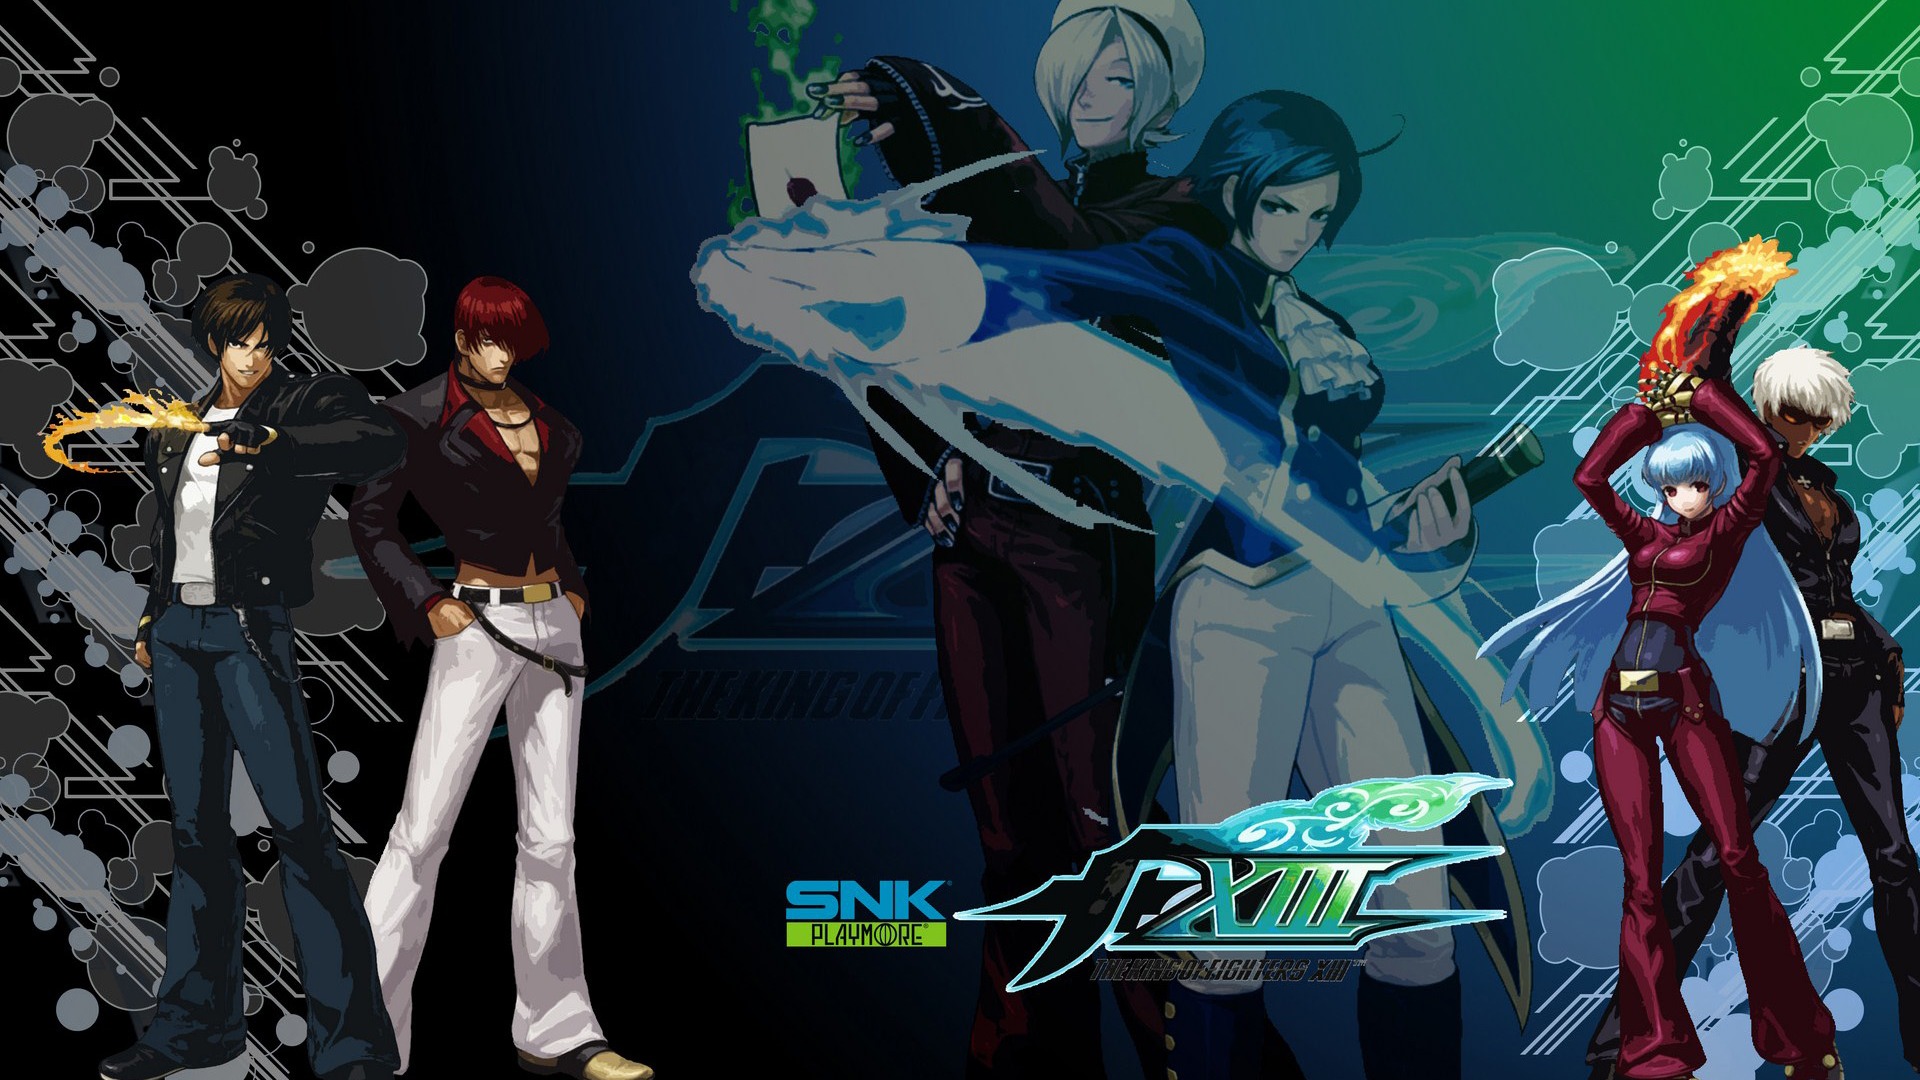 The King of Fighters XIII 拳皇13 壁纸专辑4 - 1920x1080